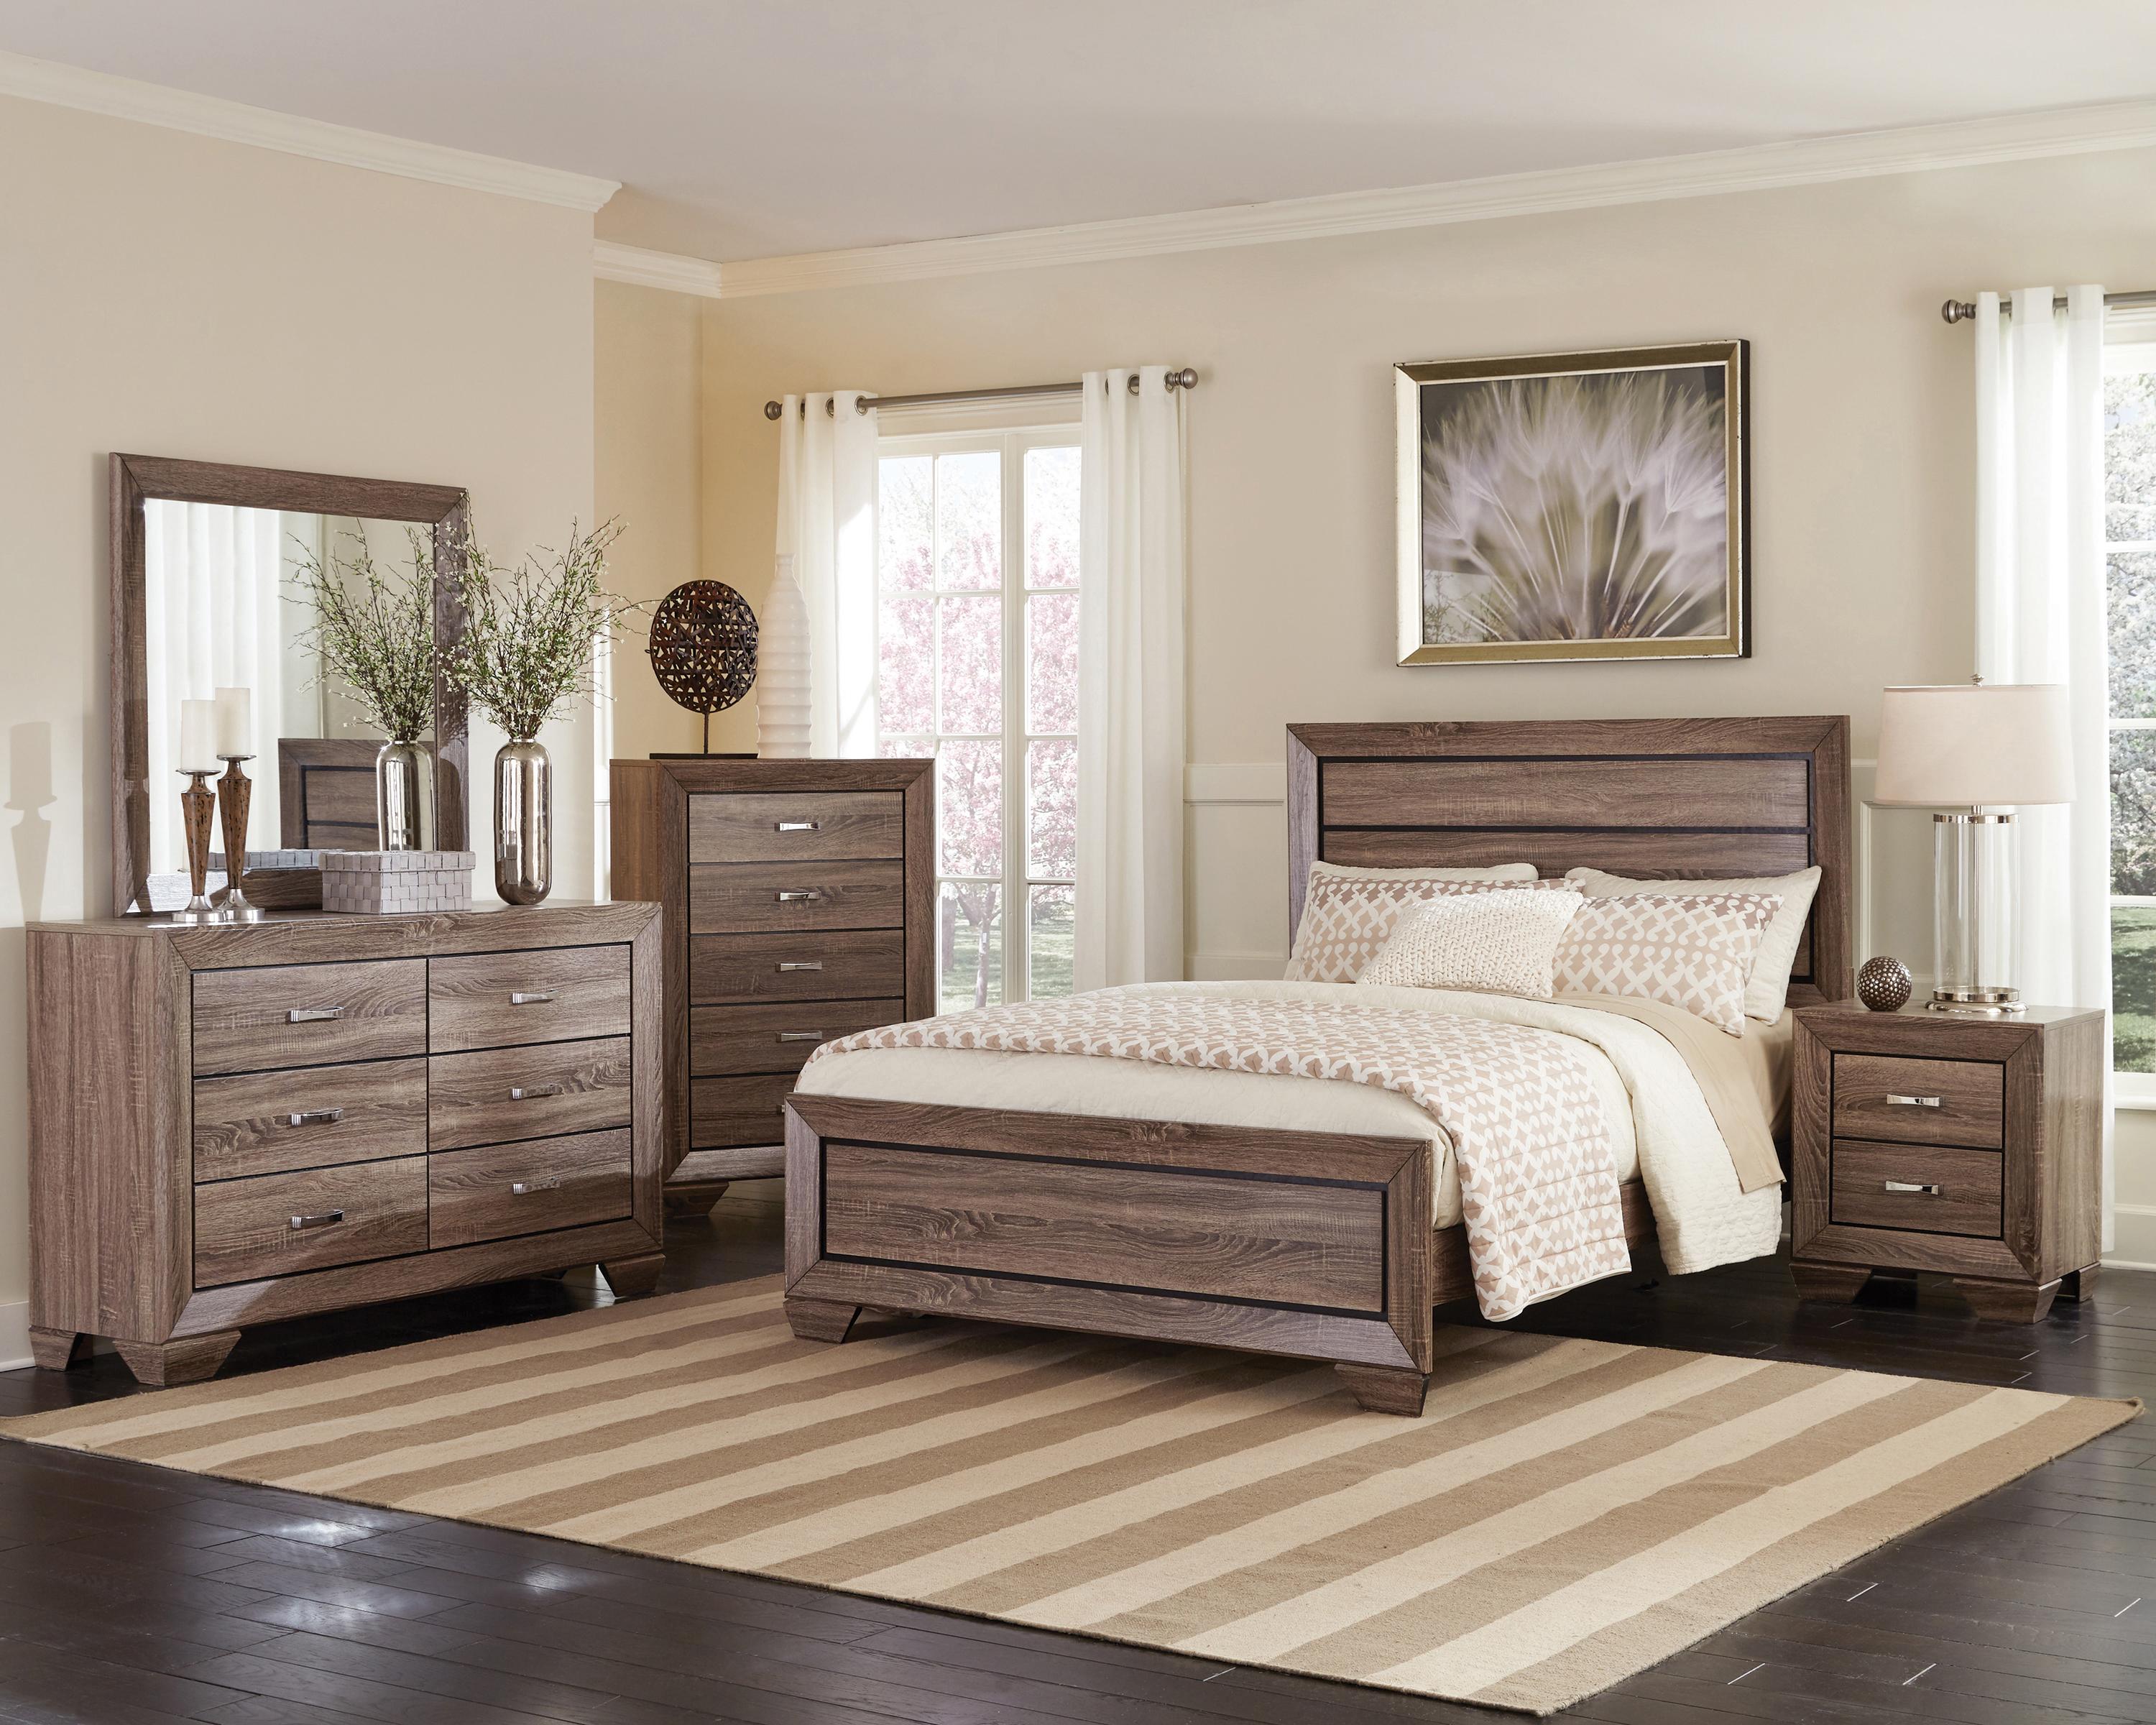 Transitional Bedroom Set 204191Q-5PC Kauffman 204191Q-5PC in Taupe 